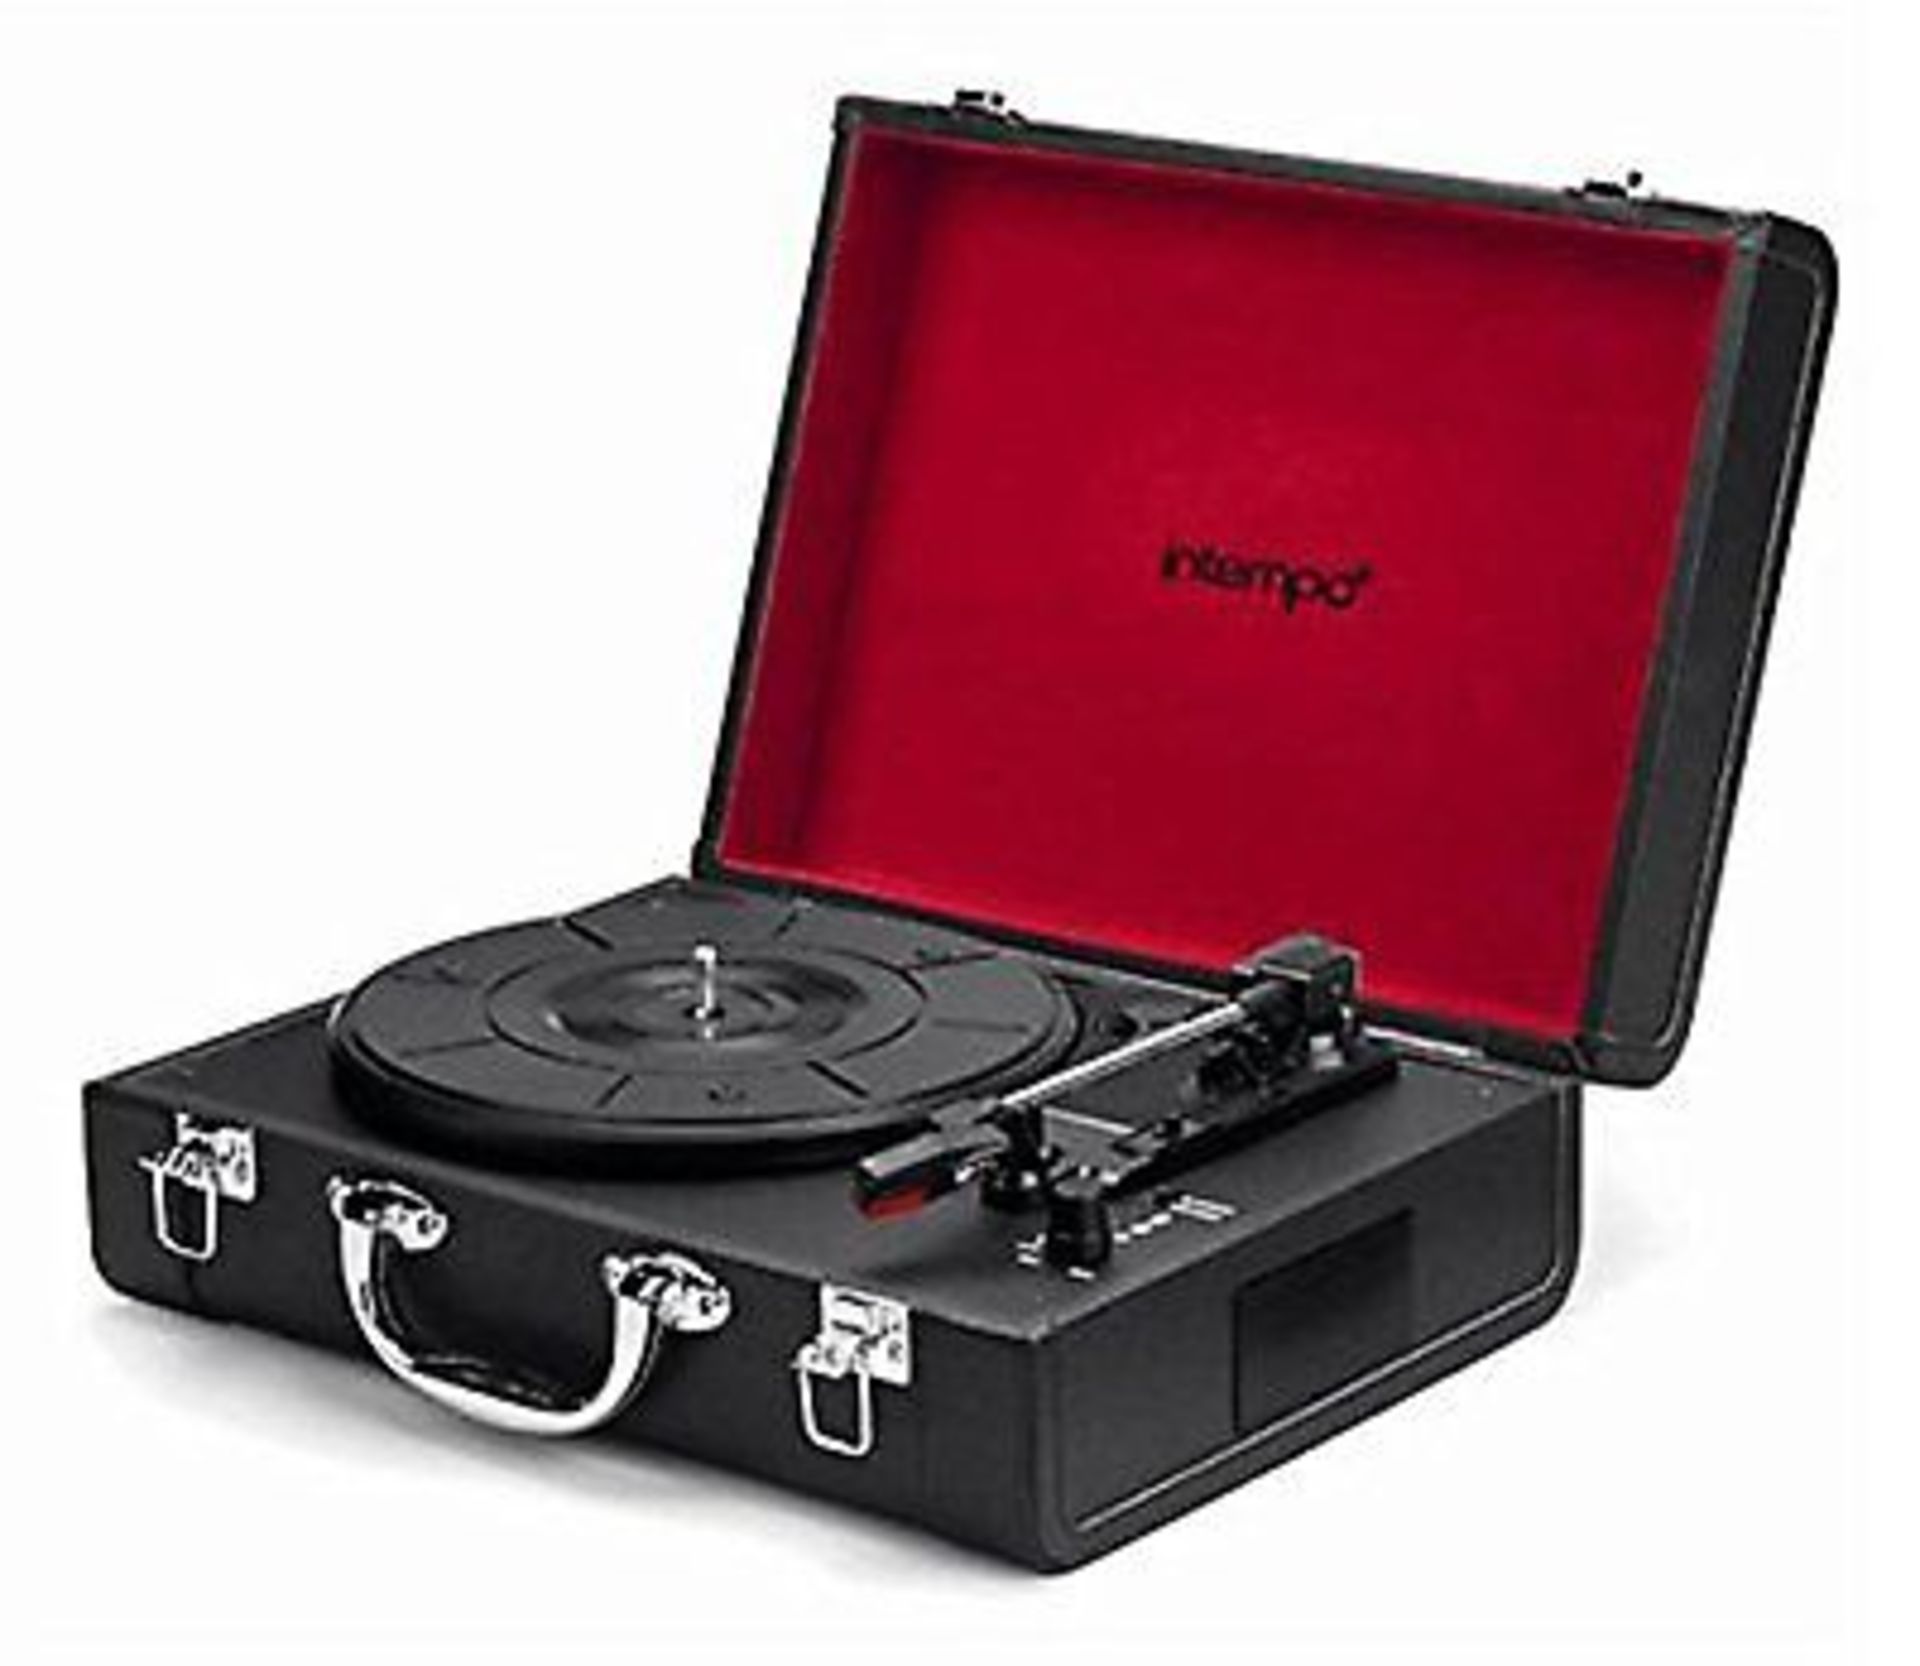 V Brand New Intempo Executive Case Bluetooth Record Turntable - Bluetooth 2.1 - 2 Built in Stereo